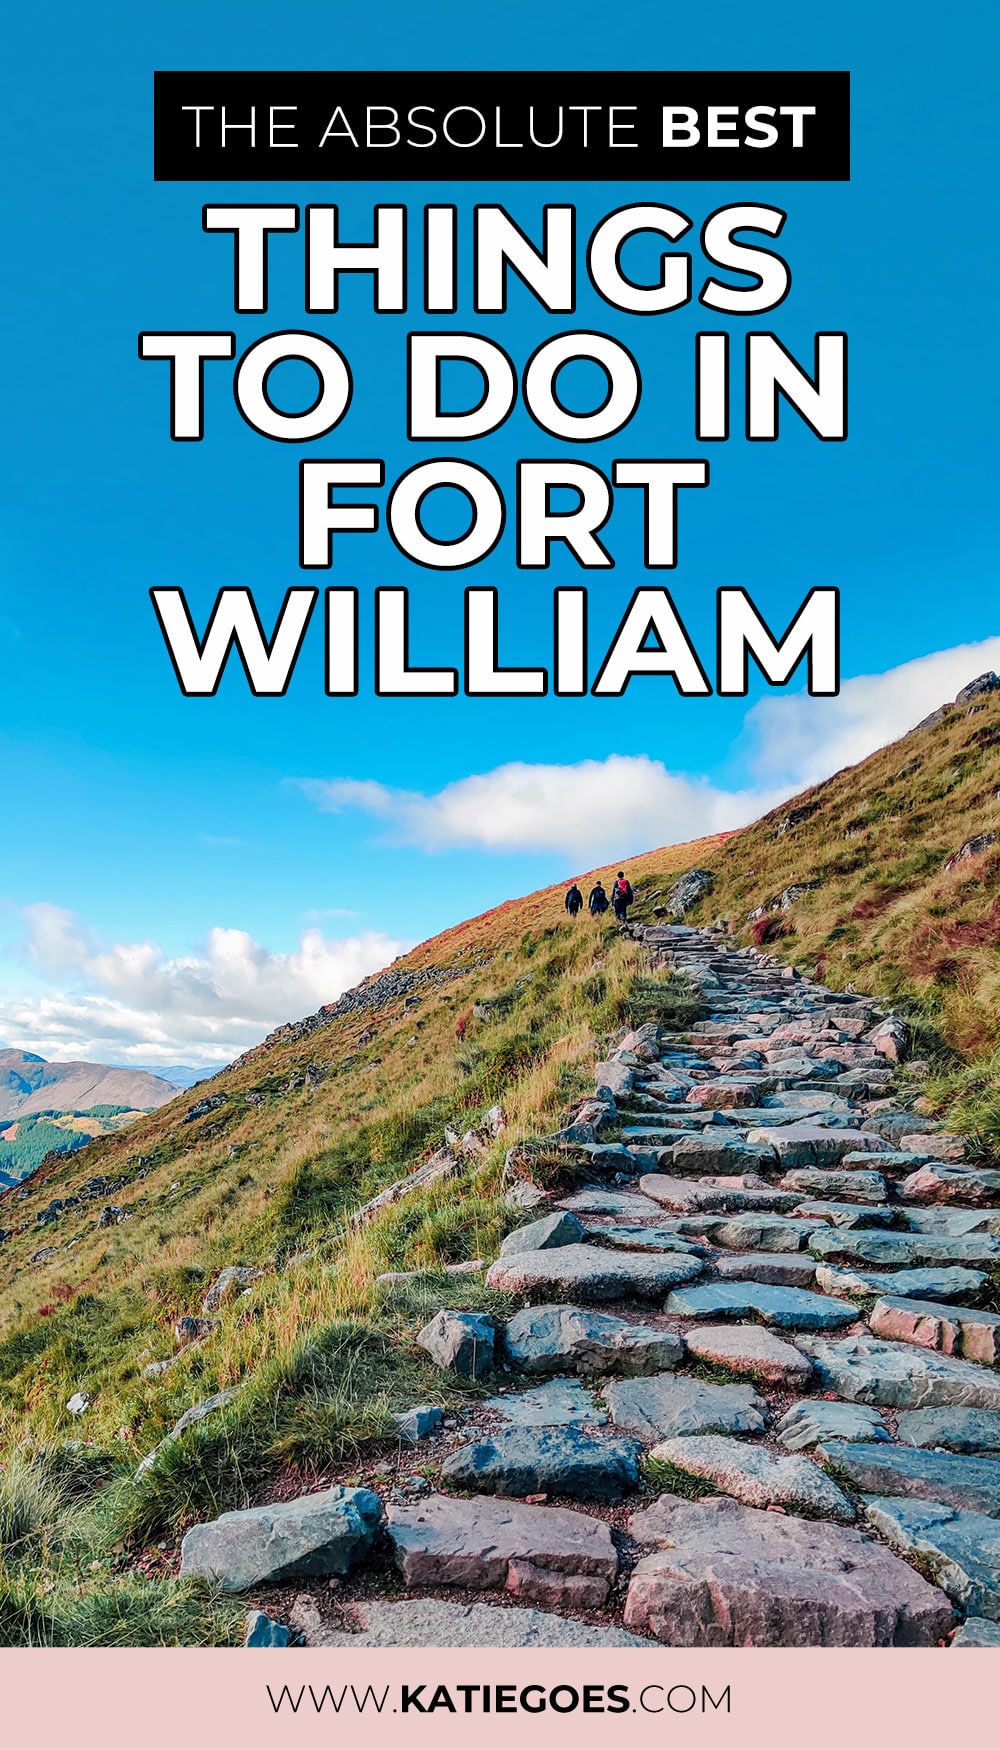 The Absolute Best Things To Do in Fort William